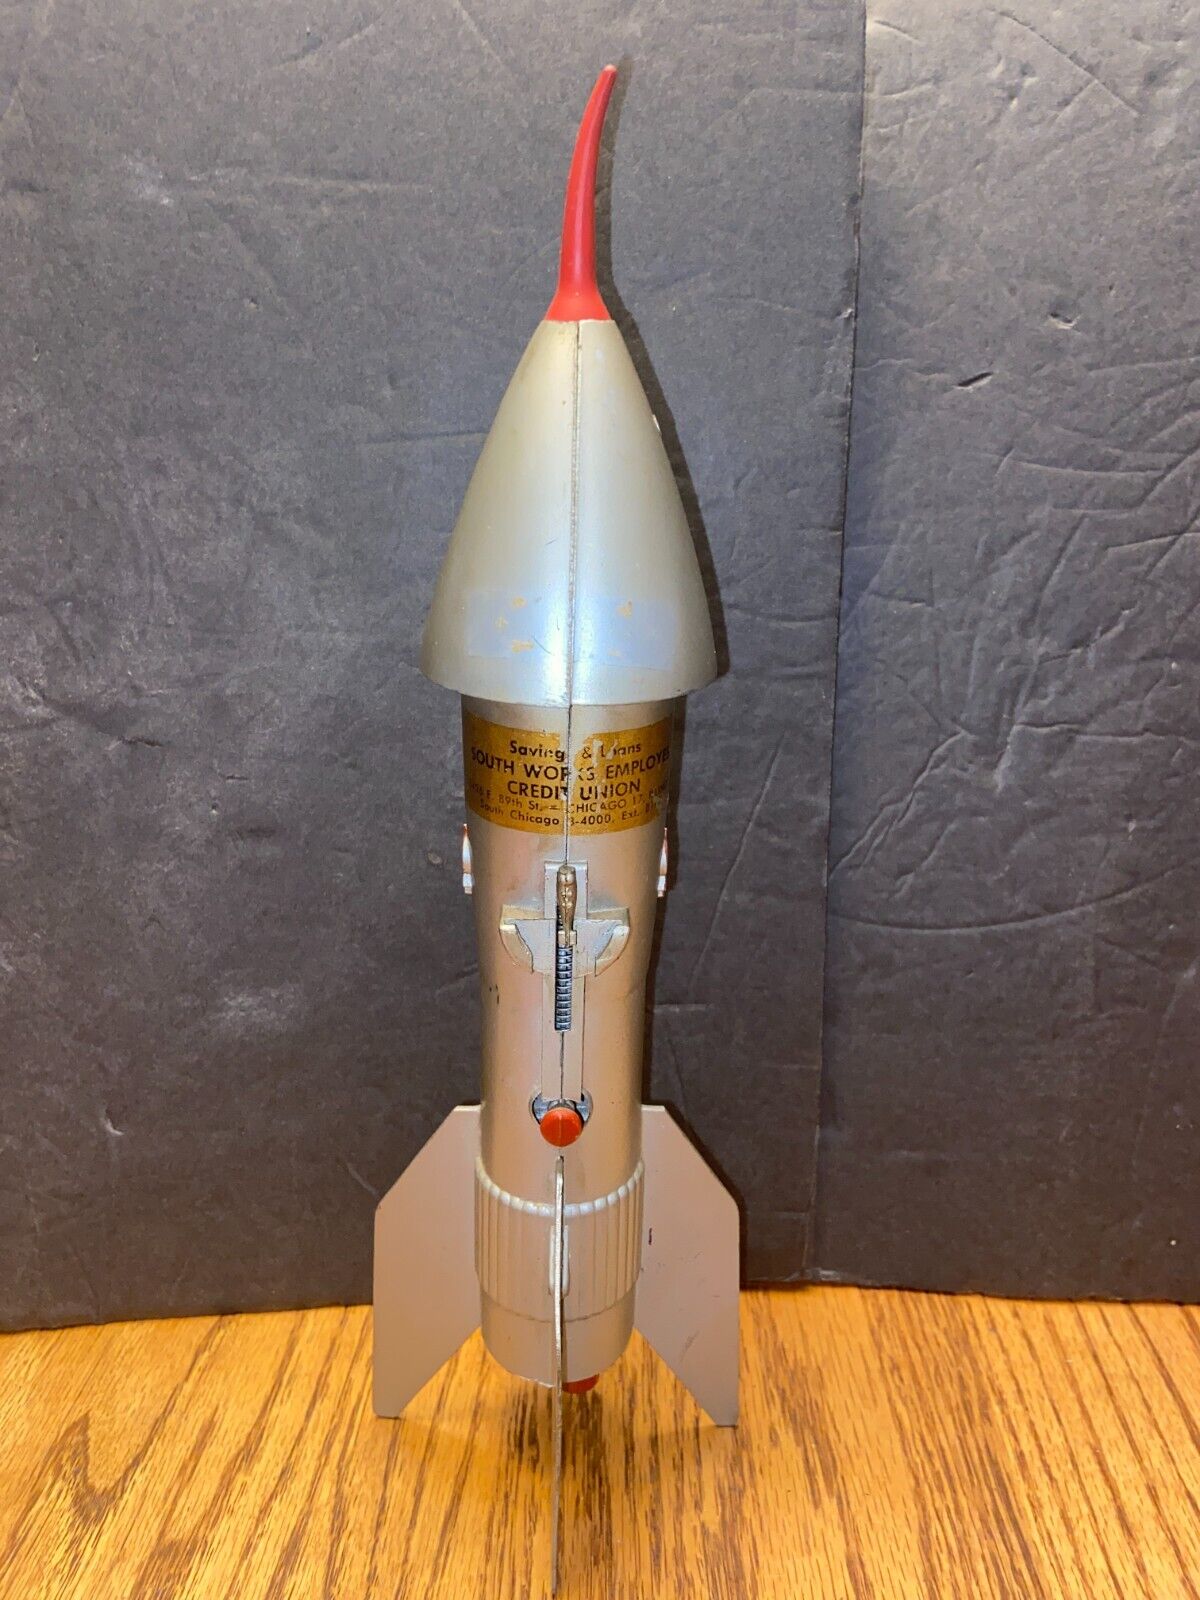 Berzac Rocket Mechanical Coin Bank Astro Mfg US Steel South Works Credit Union